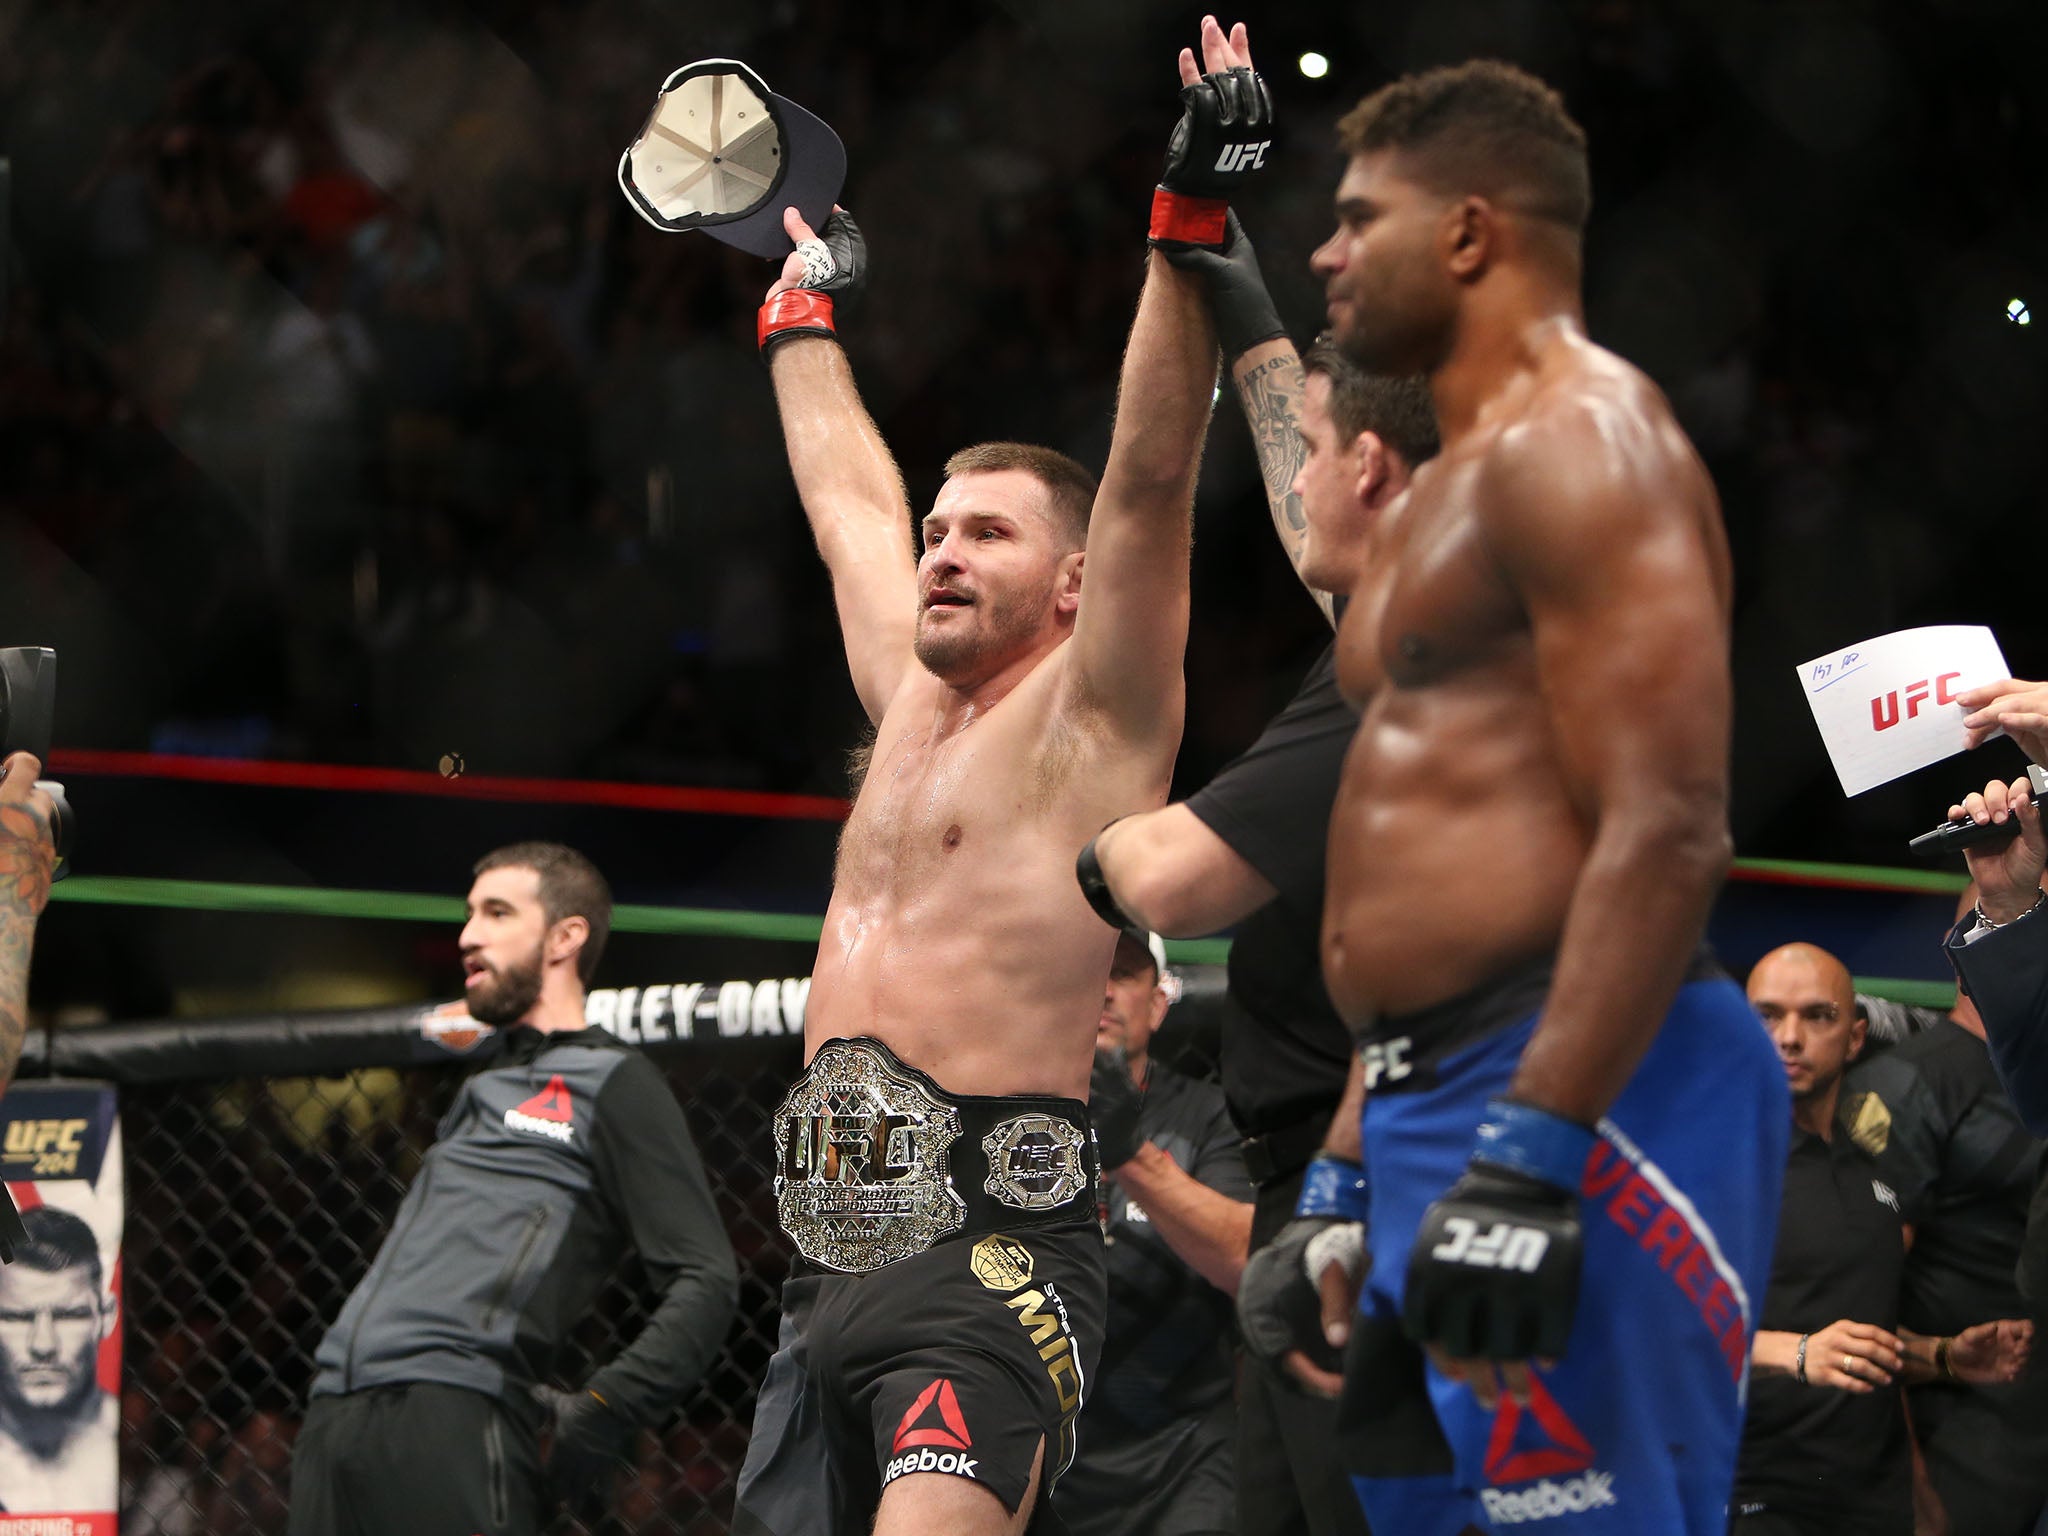 Stipe Miocic retained his title in his home town